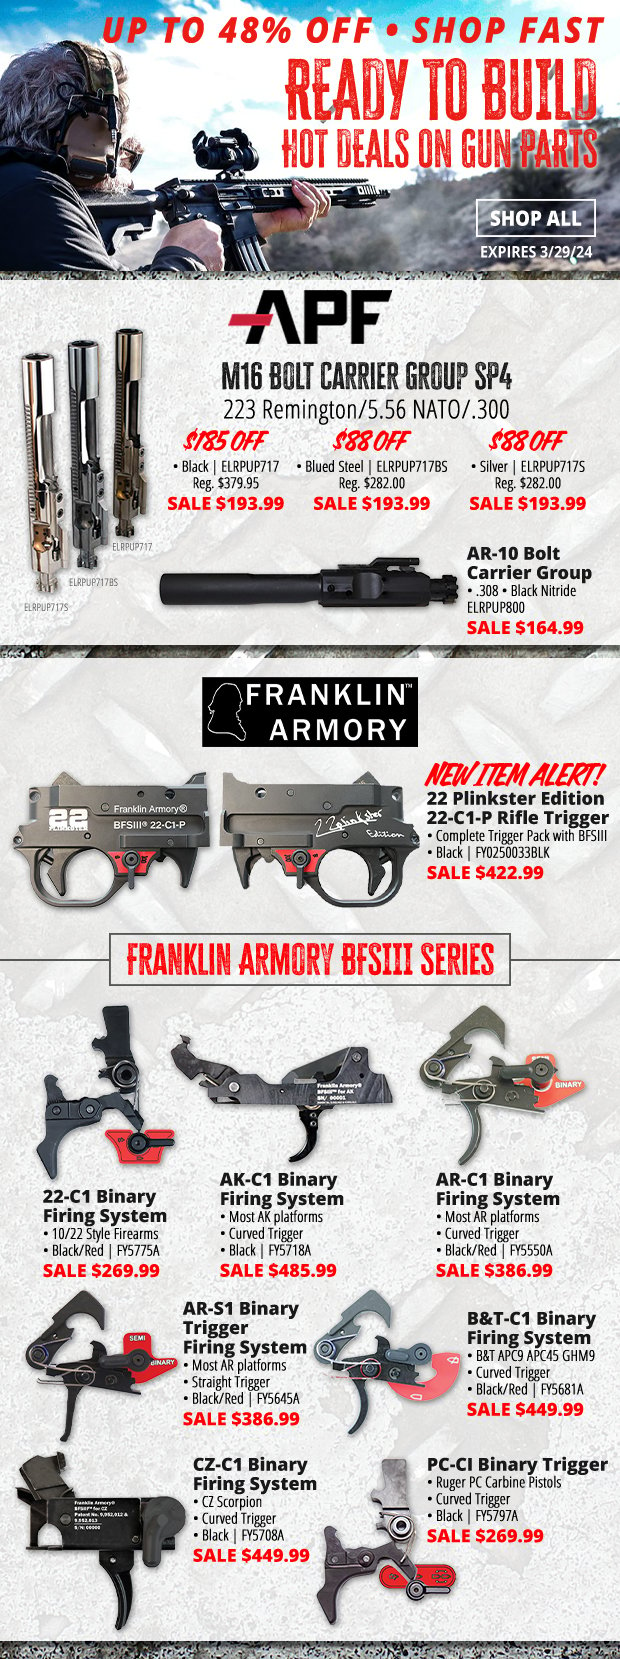 Up to 48% Off Hot Deals on Gun Parts